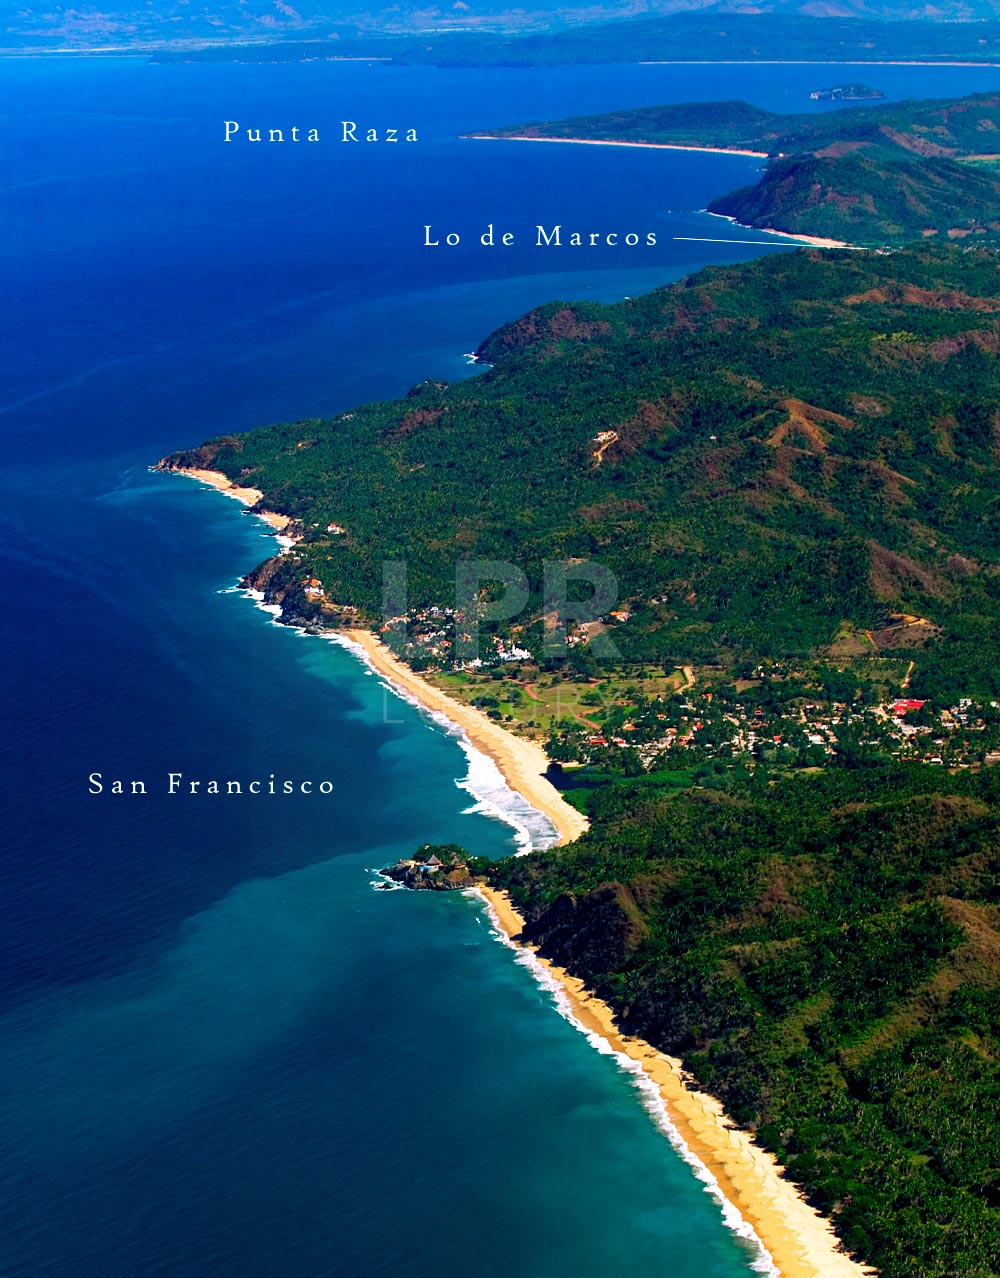 Punta Raza - Riviera Nayarit, Mexico - Hotel and residential development beachfront land for sale in Mexico